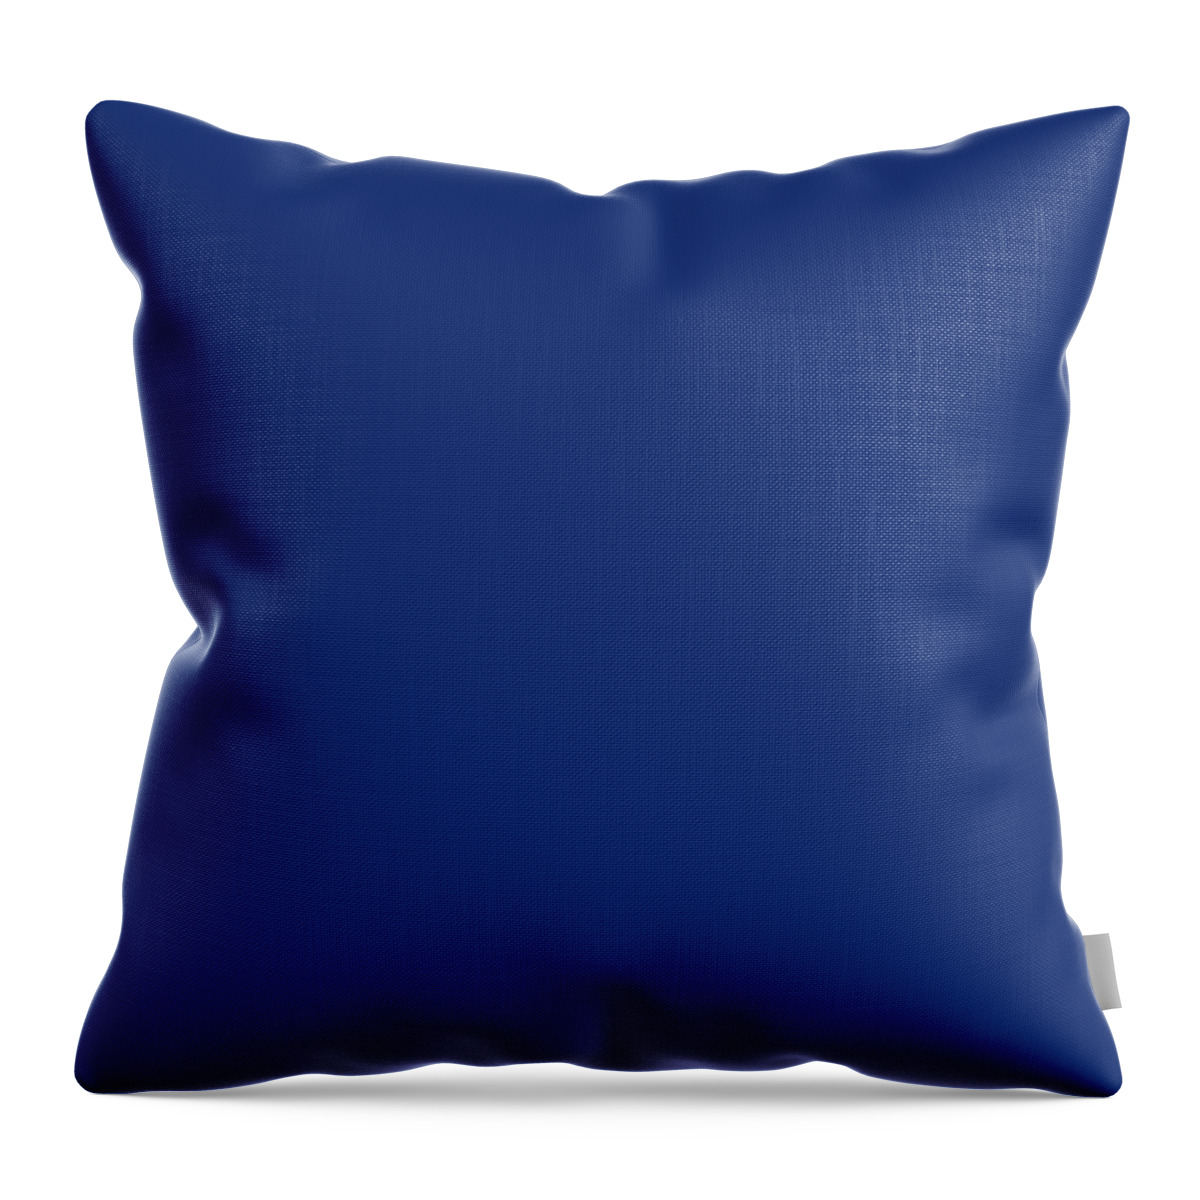 Solid Colors Throw Pillow featuring the digital art Solid Navy Blue Decor by Garaga Designs